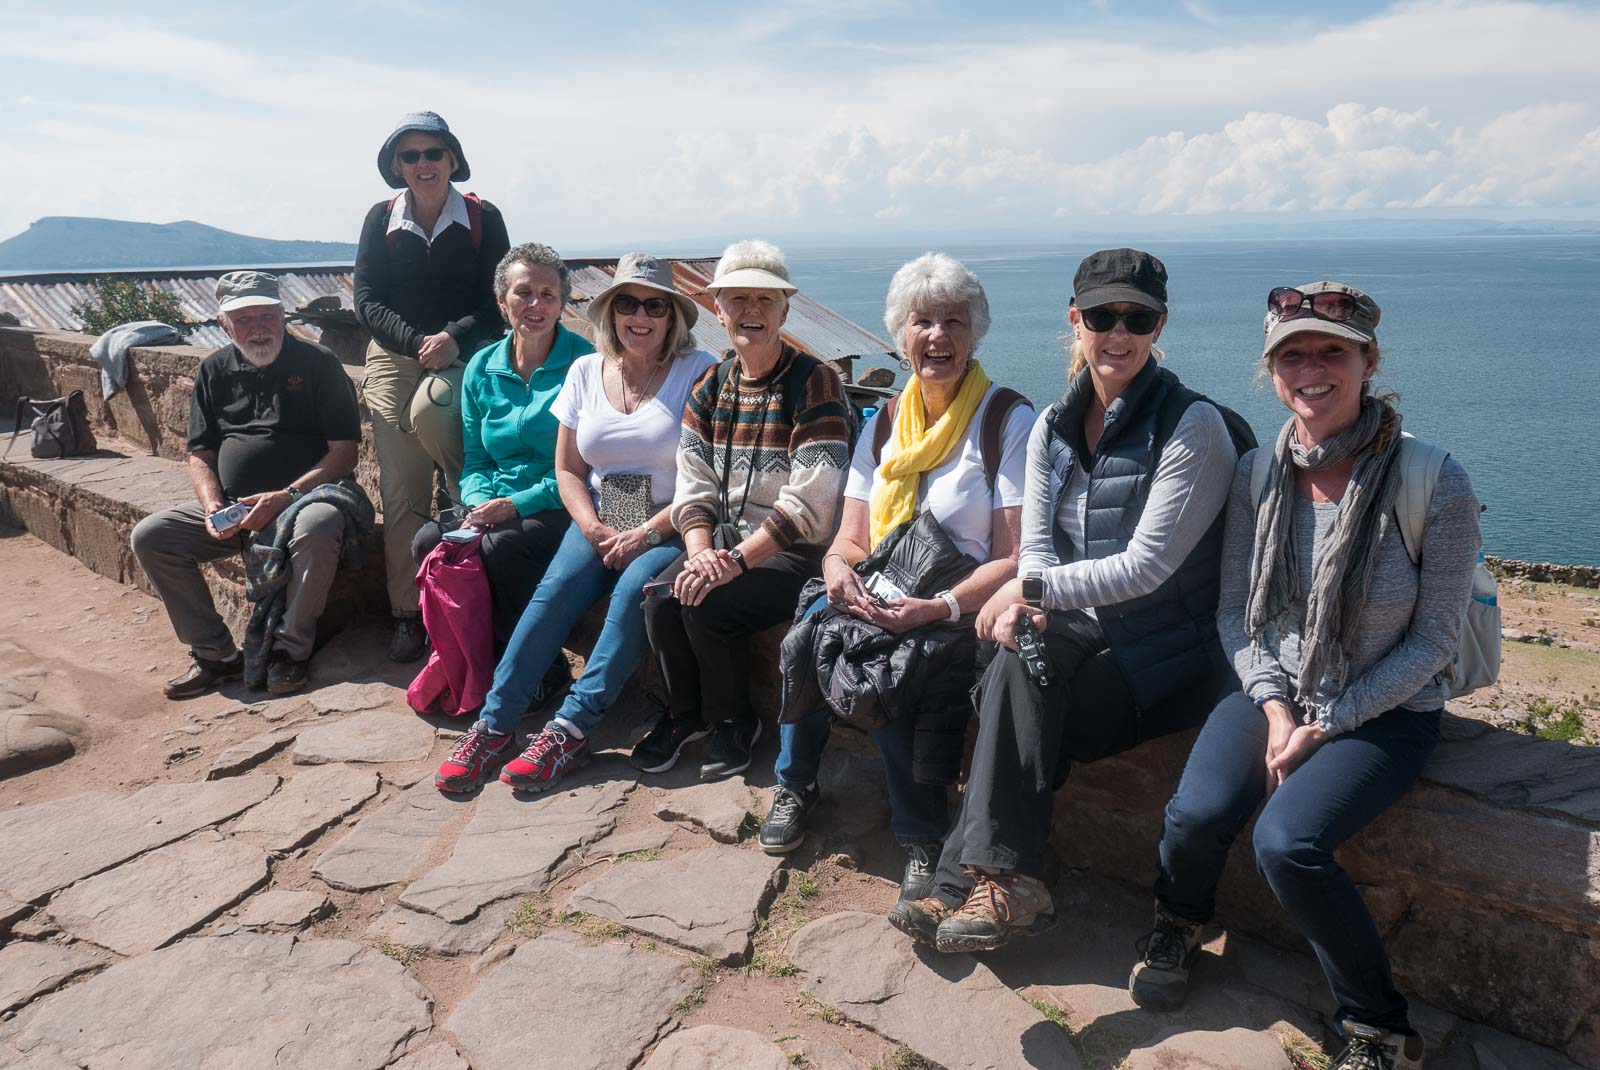 My lovely Two's a Crowd tour group on Taquile Island overlooking Lake Titicaca.